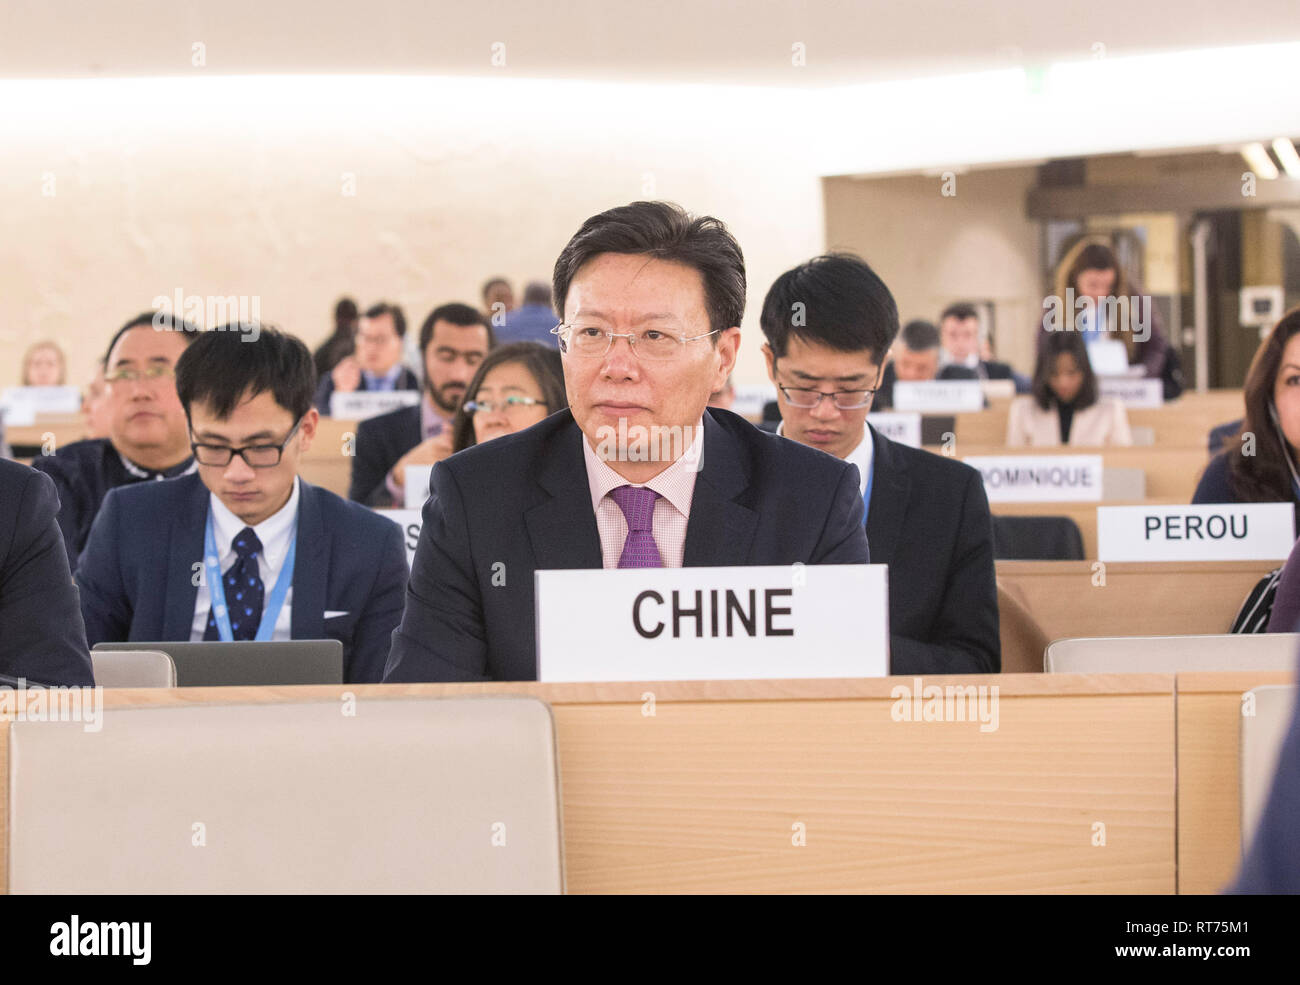 (190228) -- GENEVA, Feb. 28, 2019 (Xinhua) -- Yu Jianhua, head of the Chinese Mission to the UN Office in Geneva, attends the 40th session of the UN Human Rights Council (UNHRC) in Geneva, Switzerland, Feb. 27, 2019. The 56 ethnic groups in China, living together like brothers and sisters, are all parts of the big family of the Chinese nation, Yu Jianhua told the UNHRC session. 'The people of all ethnic groups are tightly held together like pomegranate seeds, and together they are making arduous efforts for the great rejuvenation of the Chinese nation where they can all live a happy life,' Yu  Stock Photo